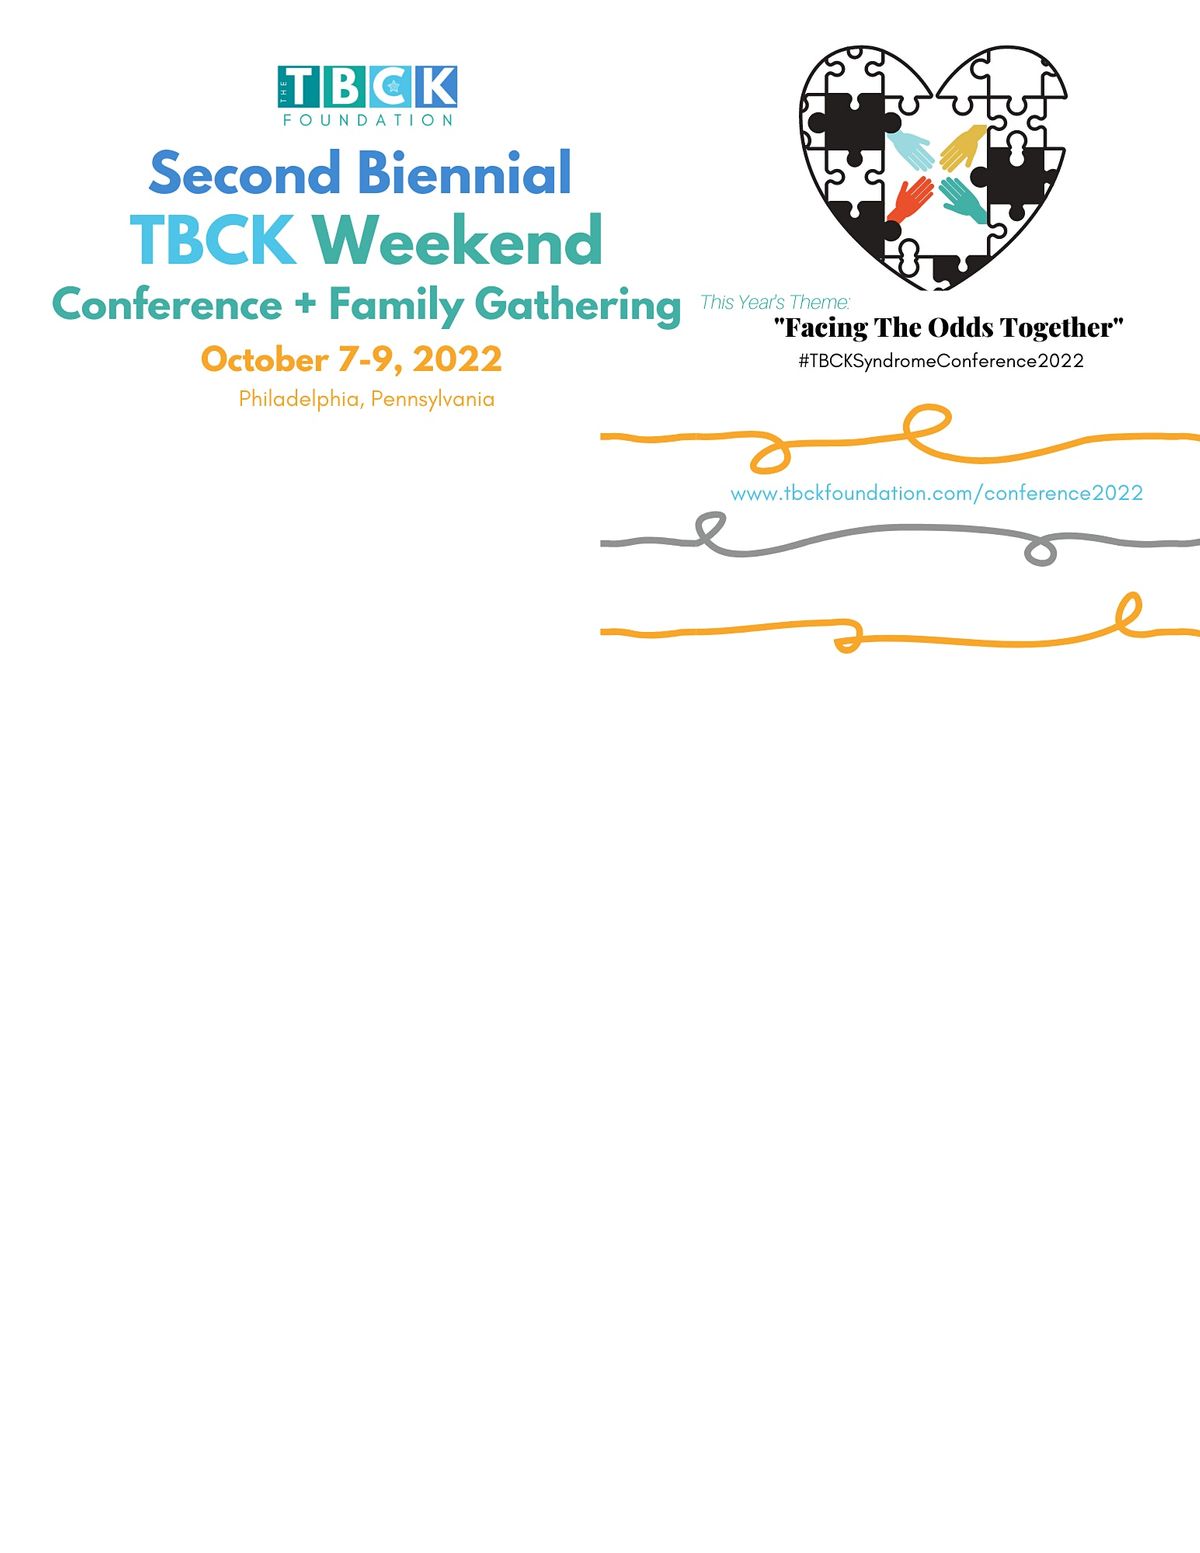 TBCK Weekend: Conference + Family Gathering